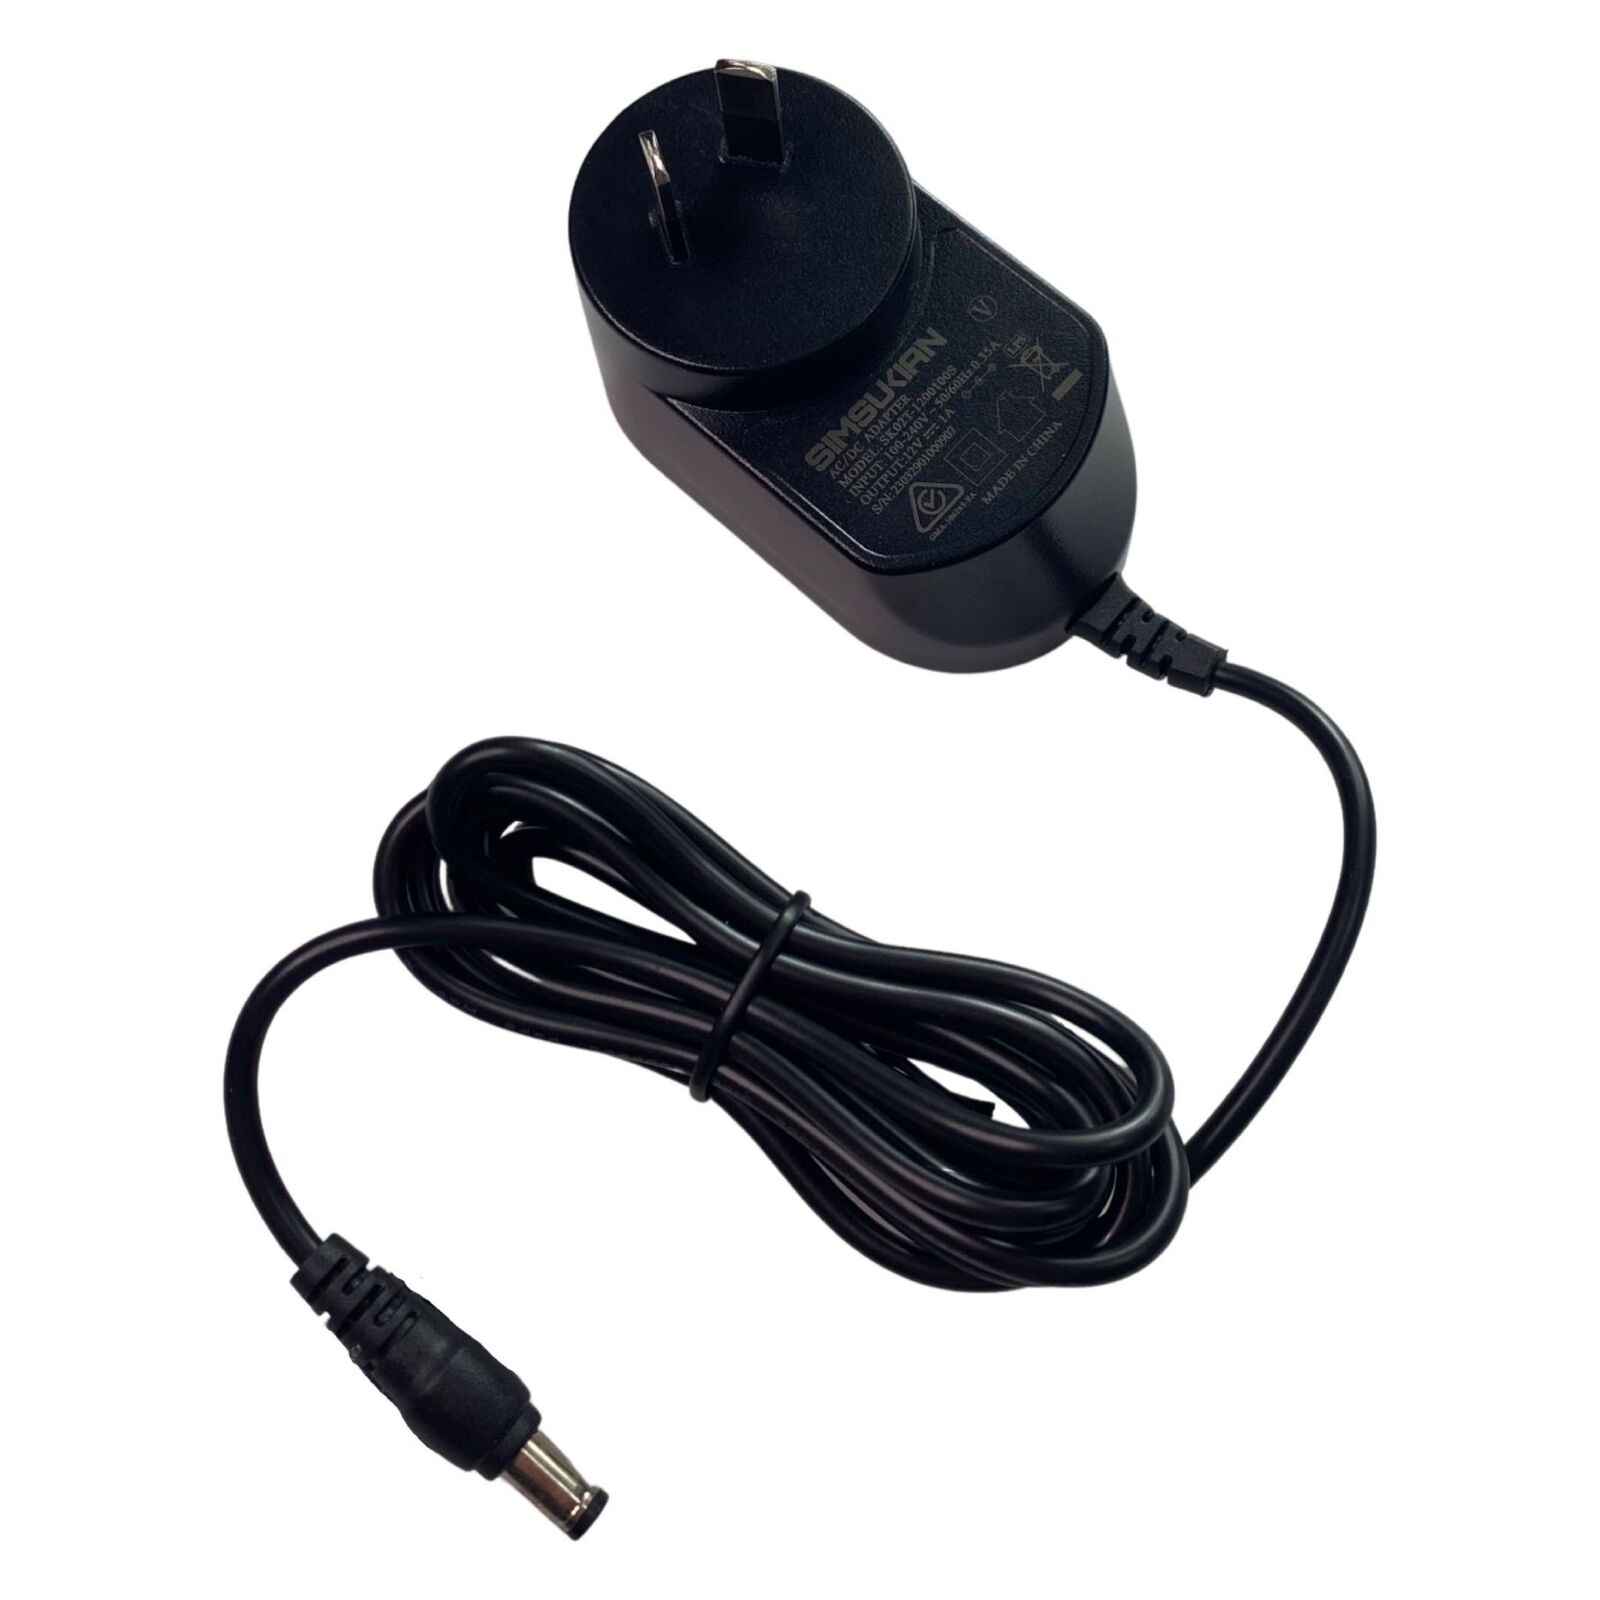 12V 1Amp Power Adapter with 2.1 DC plug